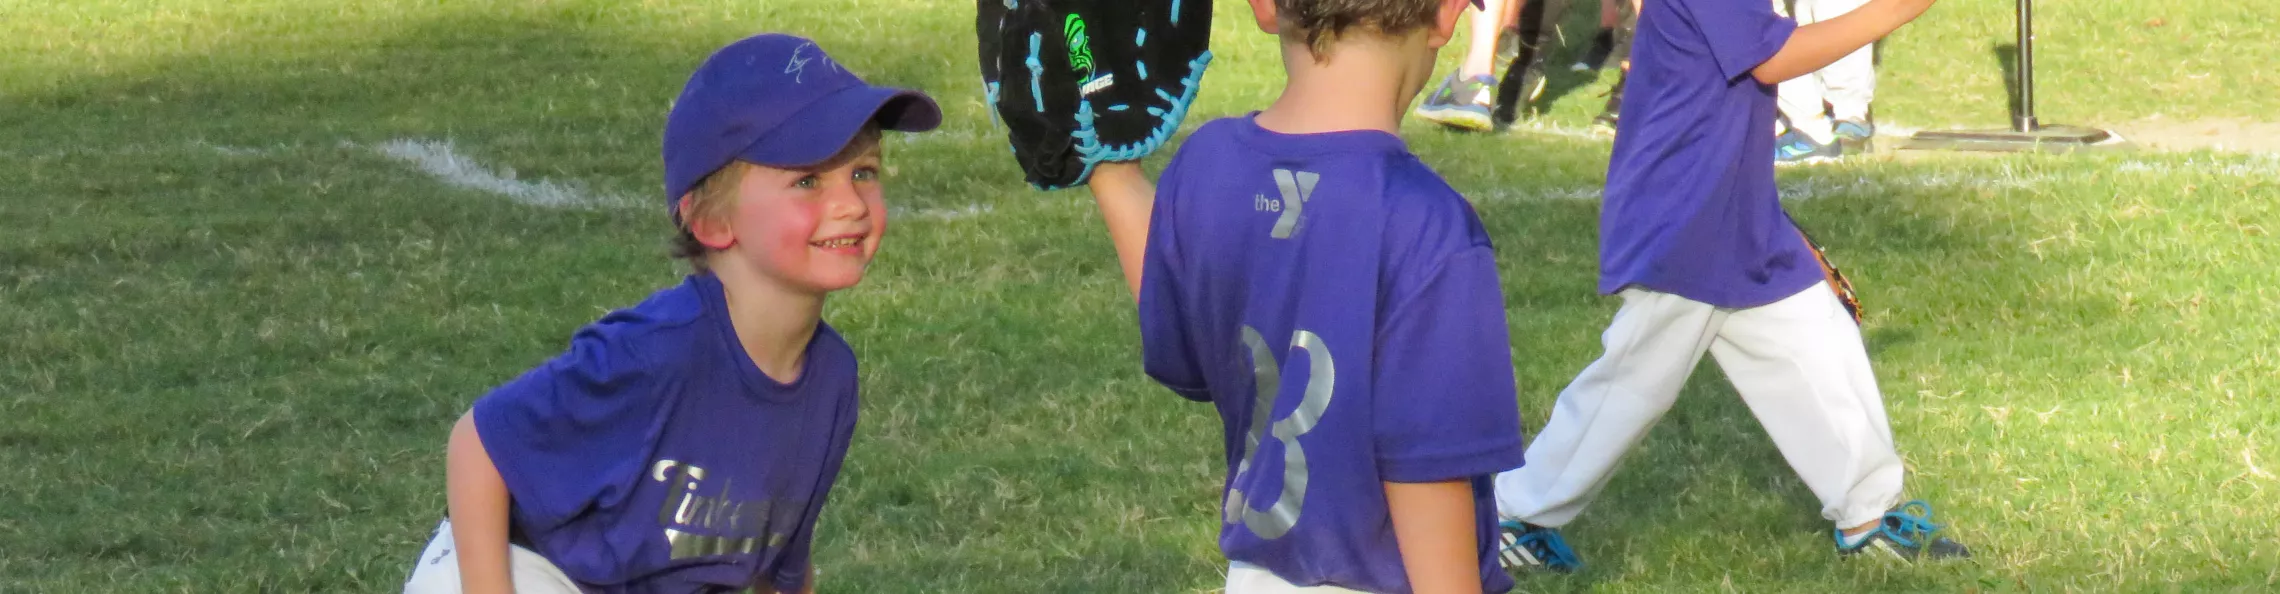 Youth Baseball participant smiling in a purple jersey and baseball cap 